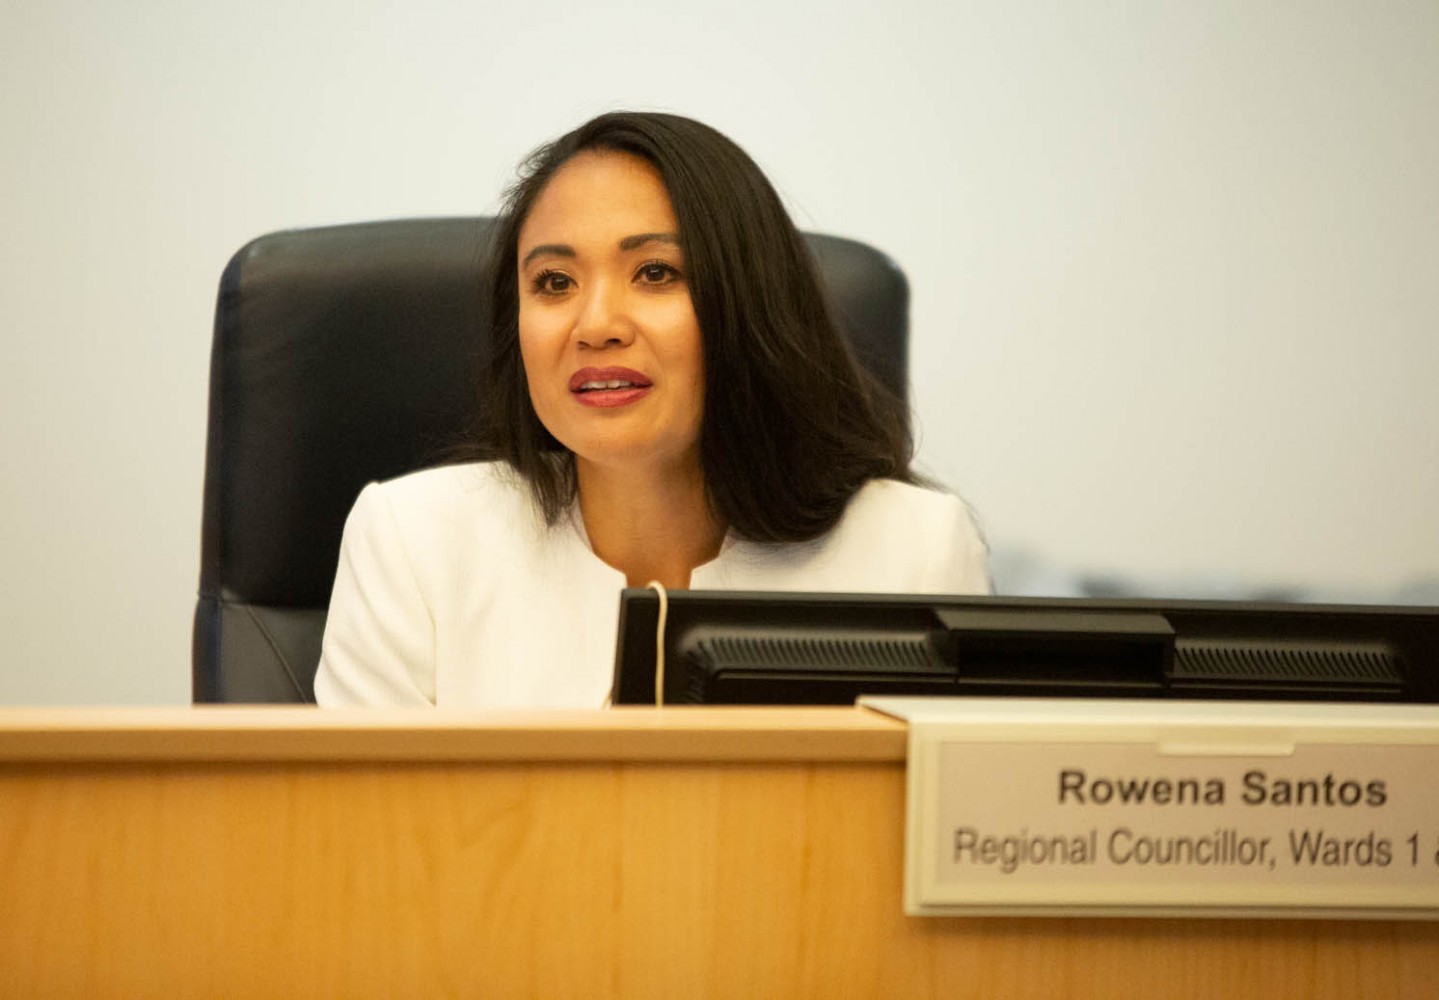 Councillor Rowena Santos to be investigated by Integrity Commissioner for alleged harassment of staff